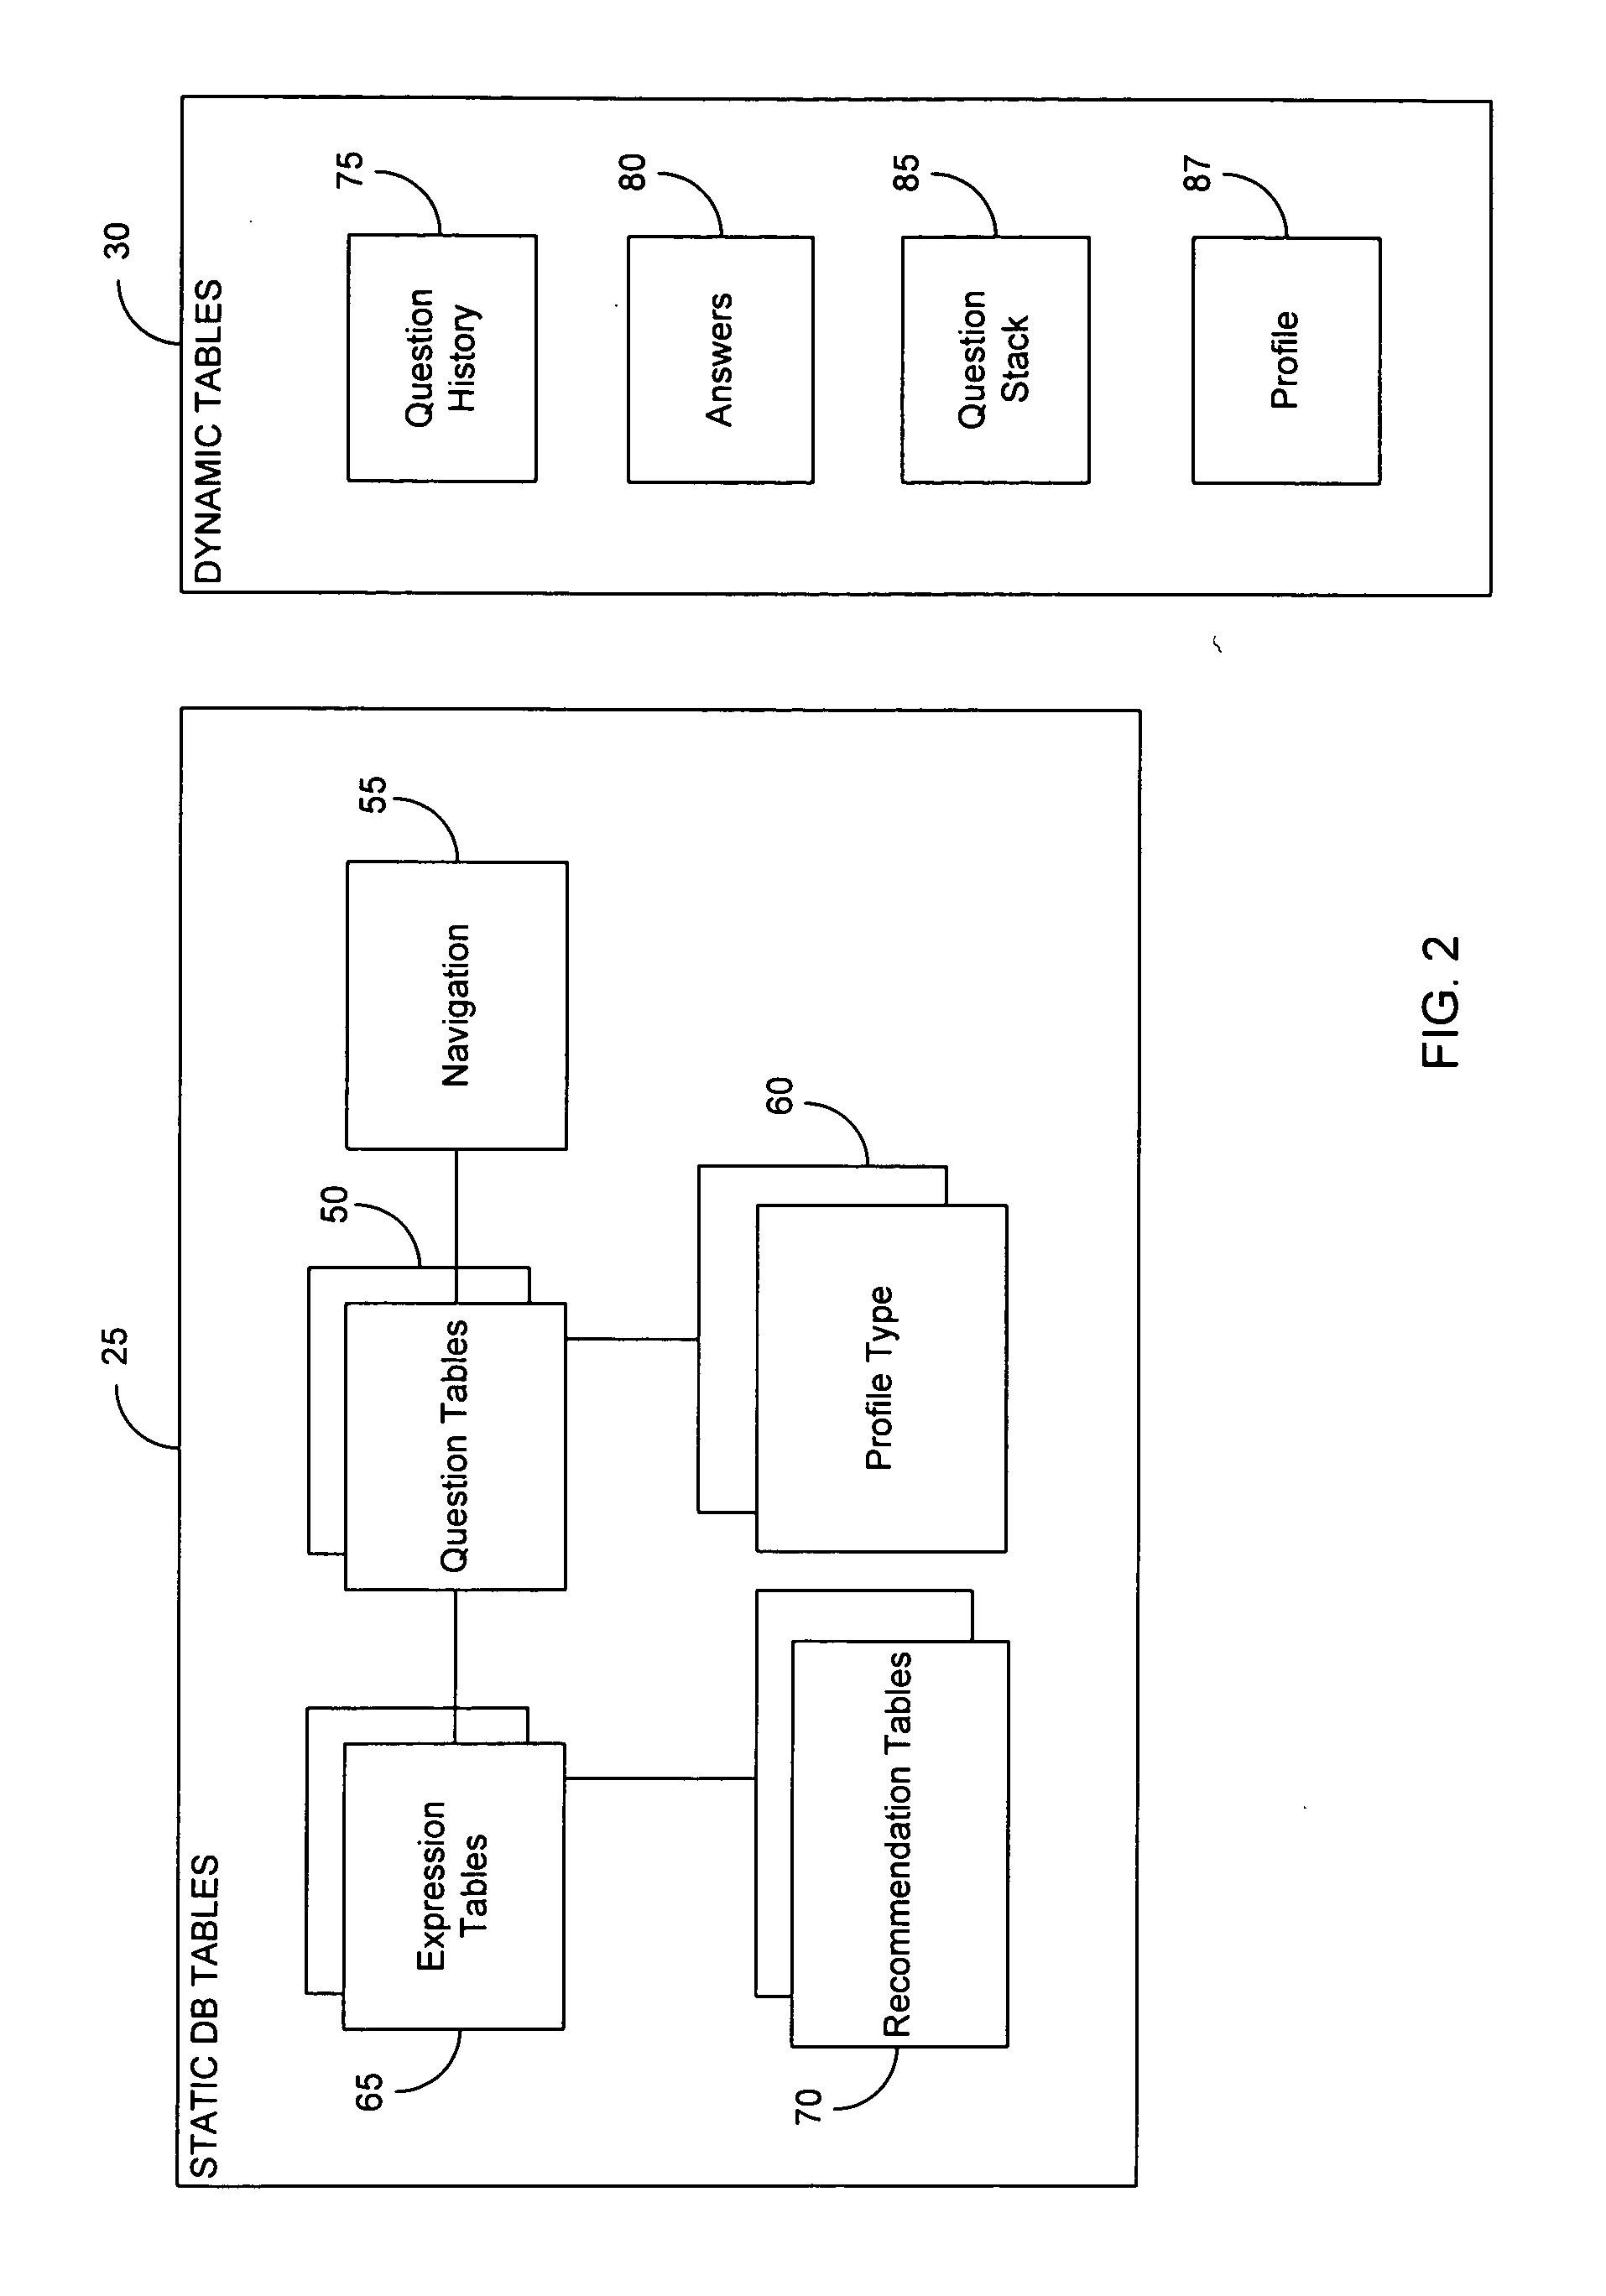 Systems and methods for generating configuration metrics in a storage network